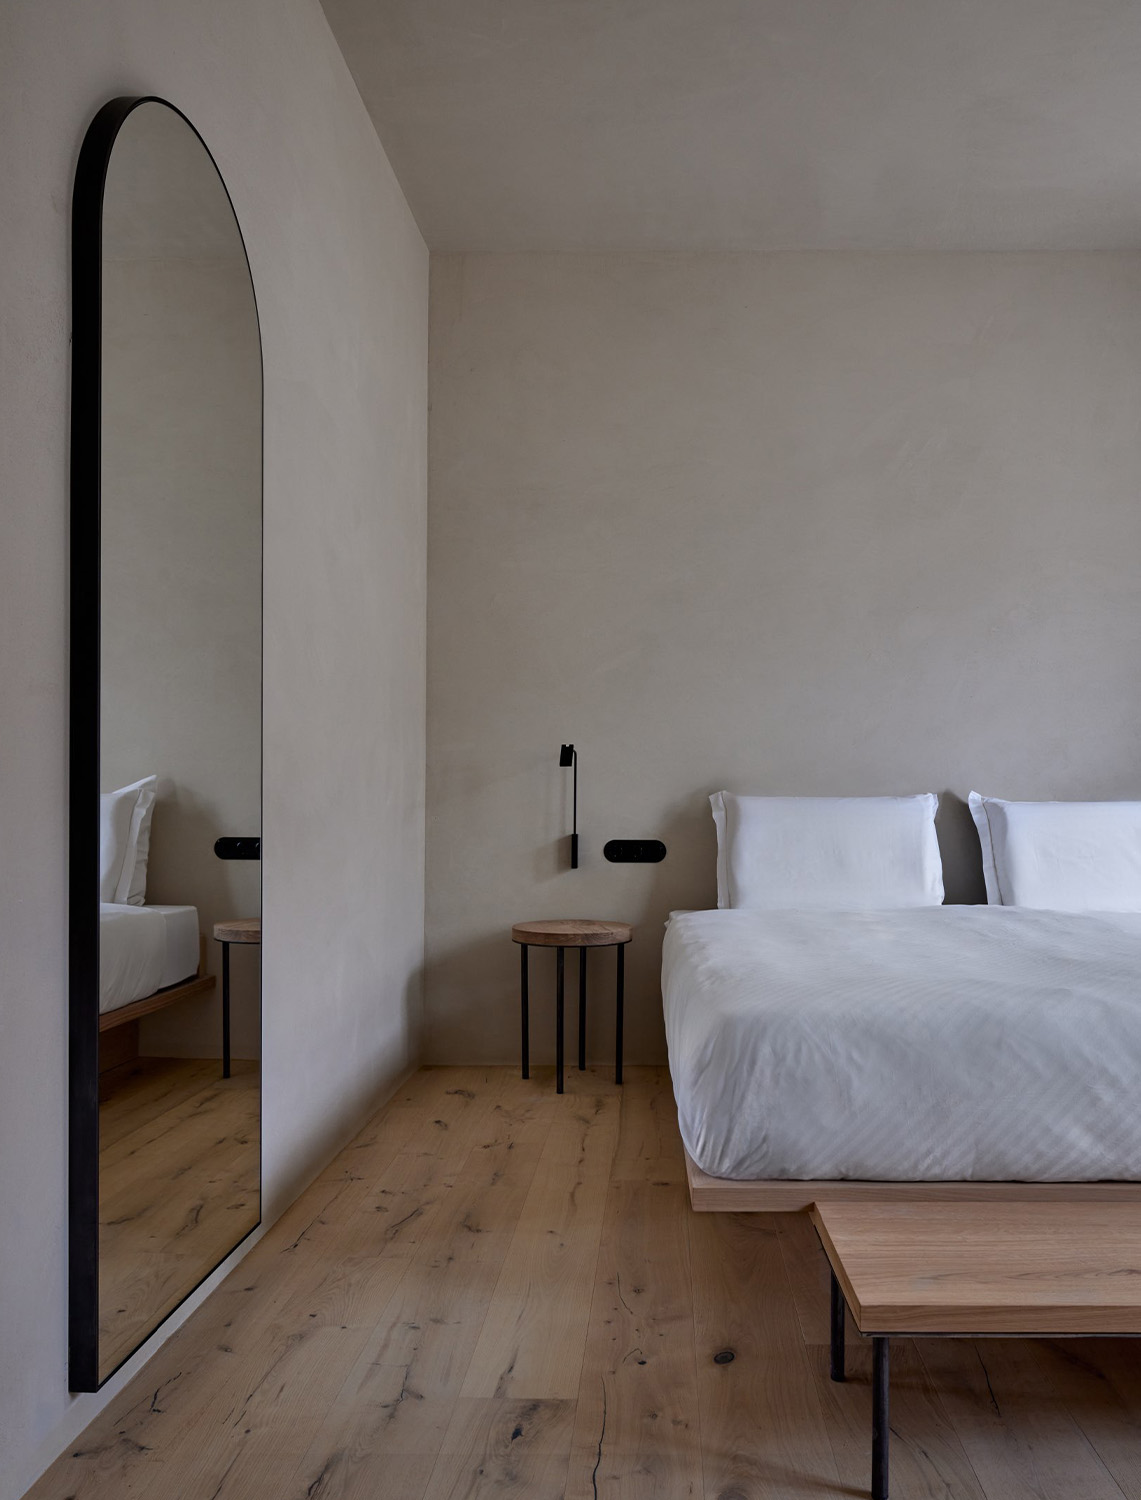 Bed with white bed linen, wooden floor, bedside table and an arch-shaped mirror on the left wall